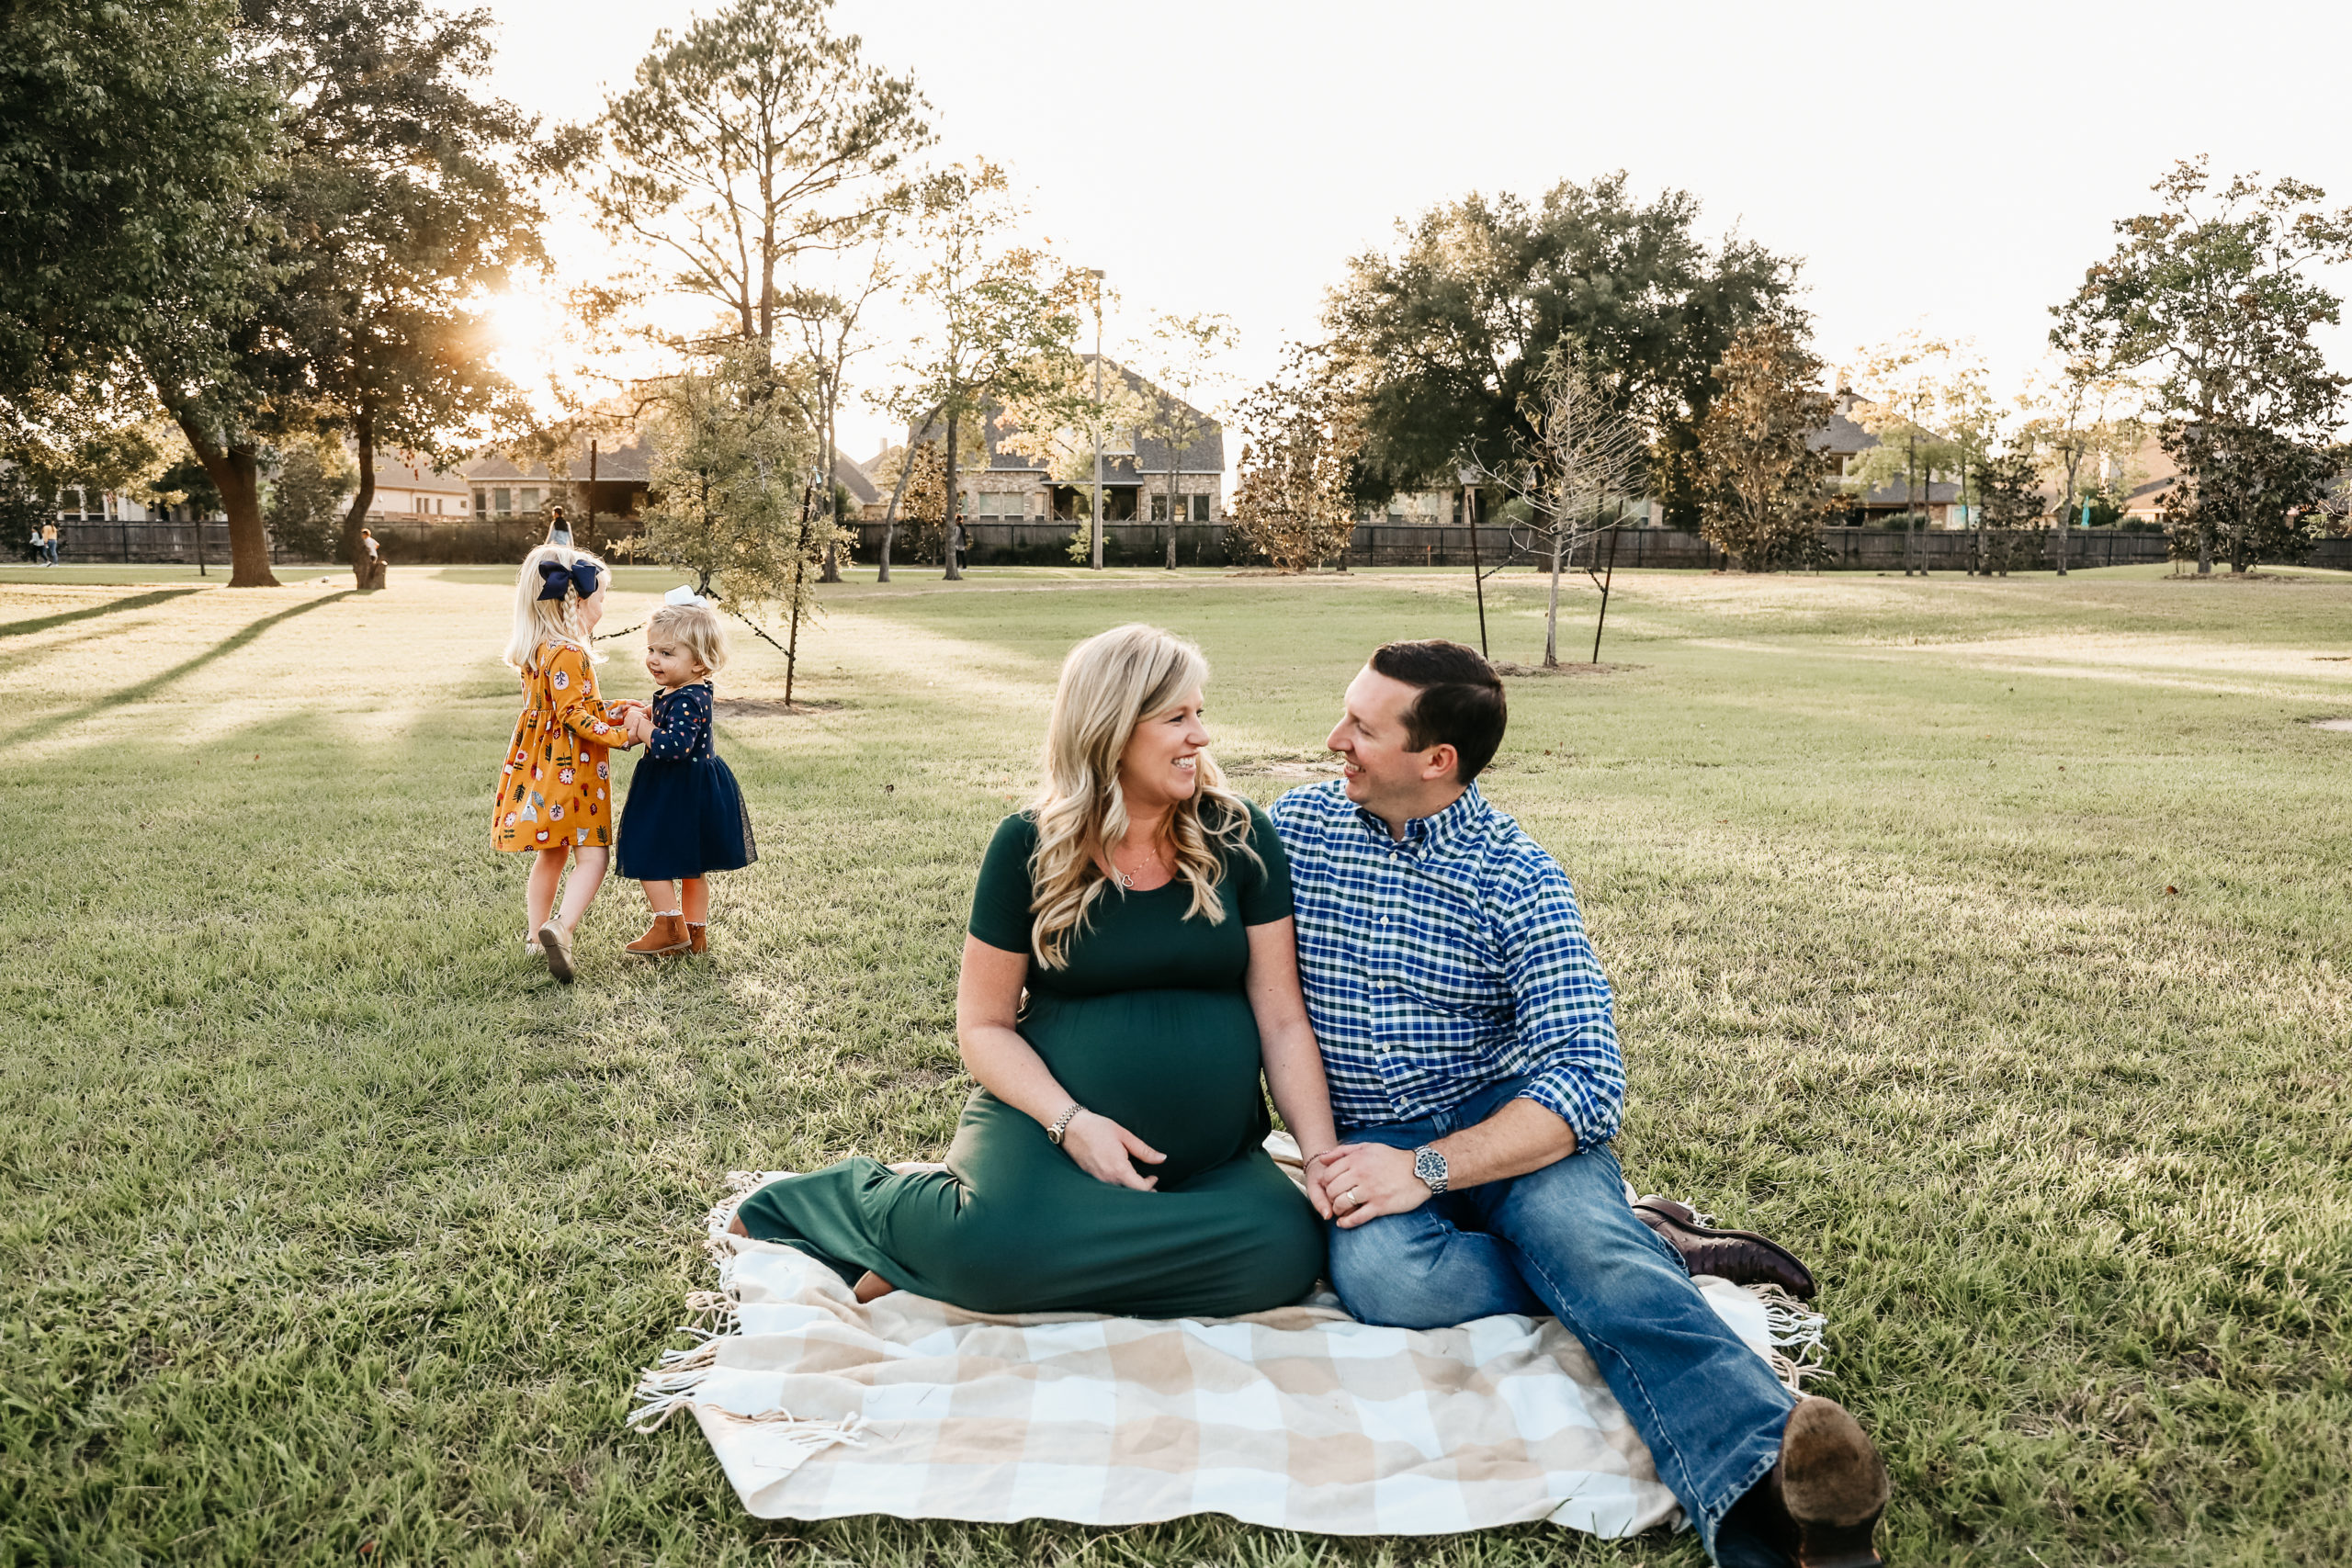 Family maternity session